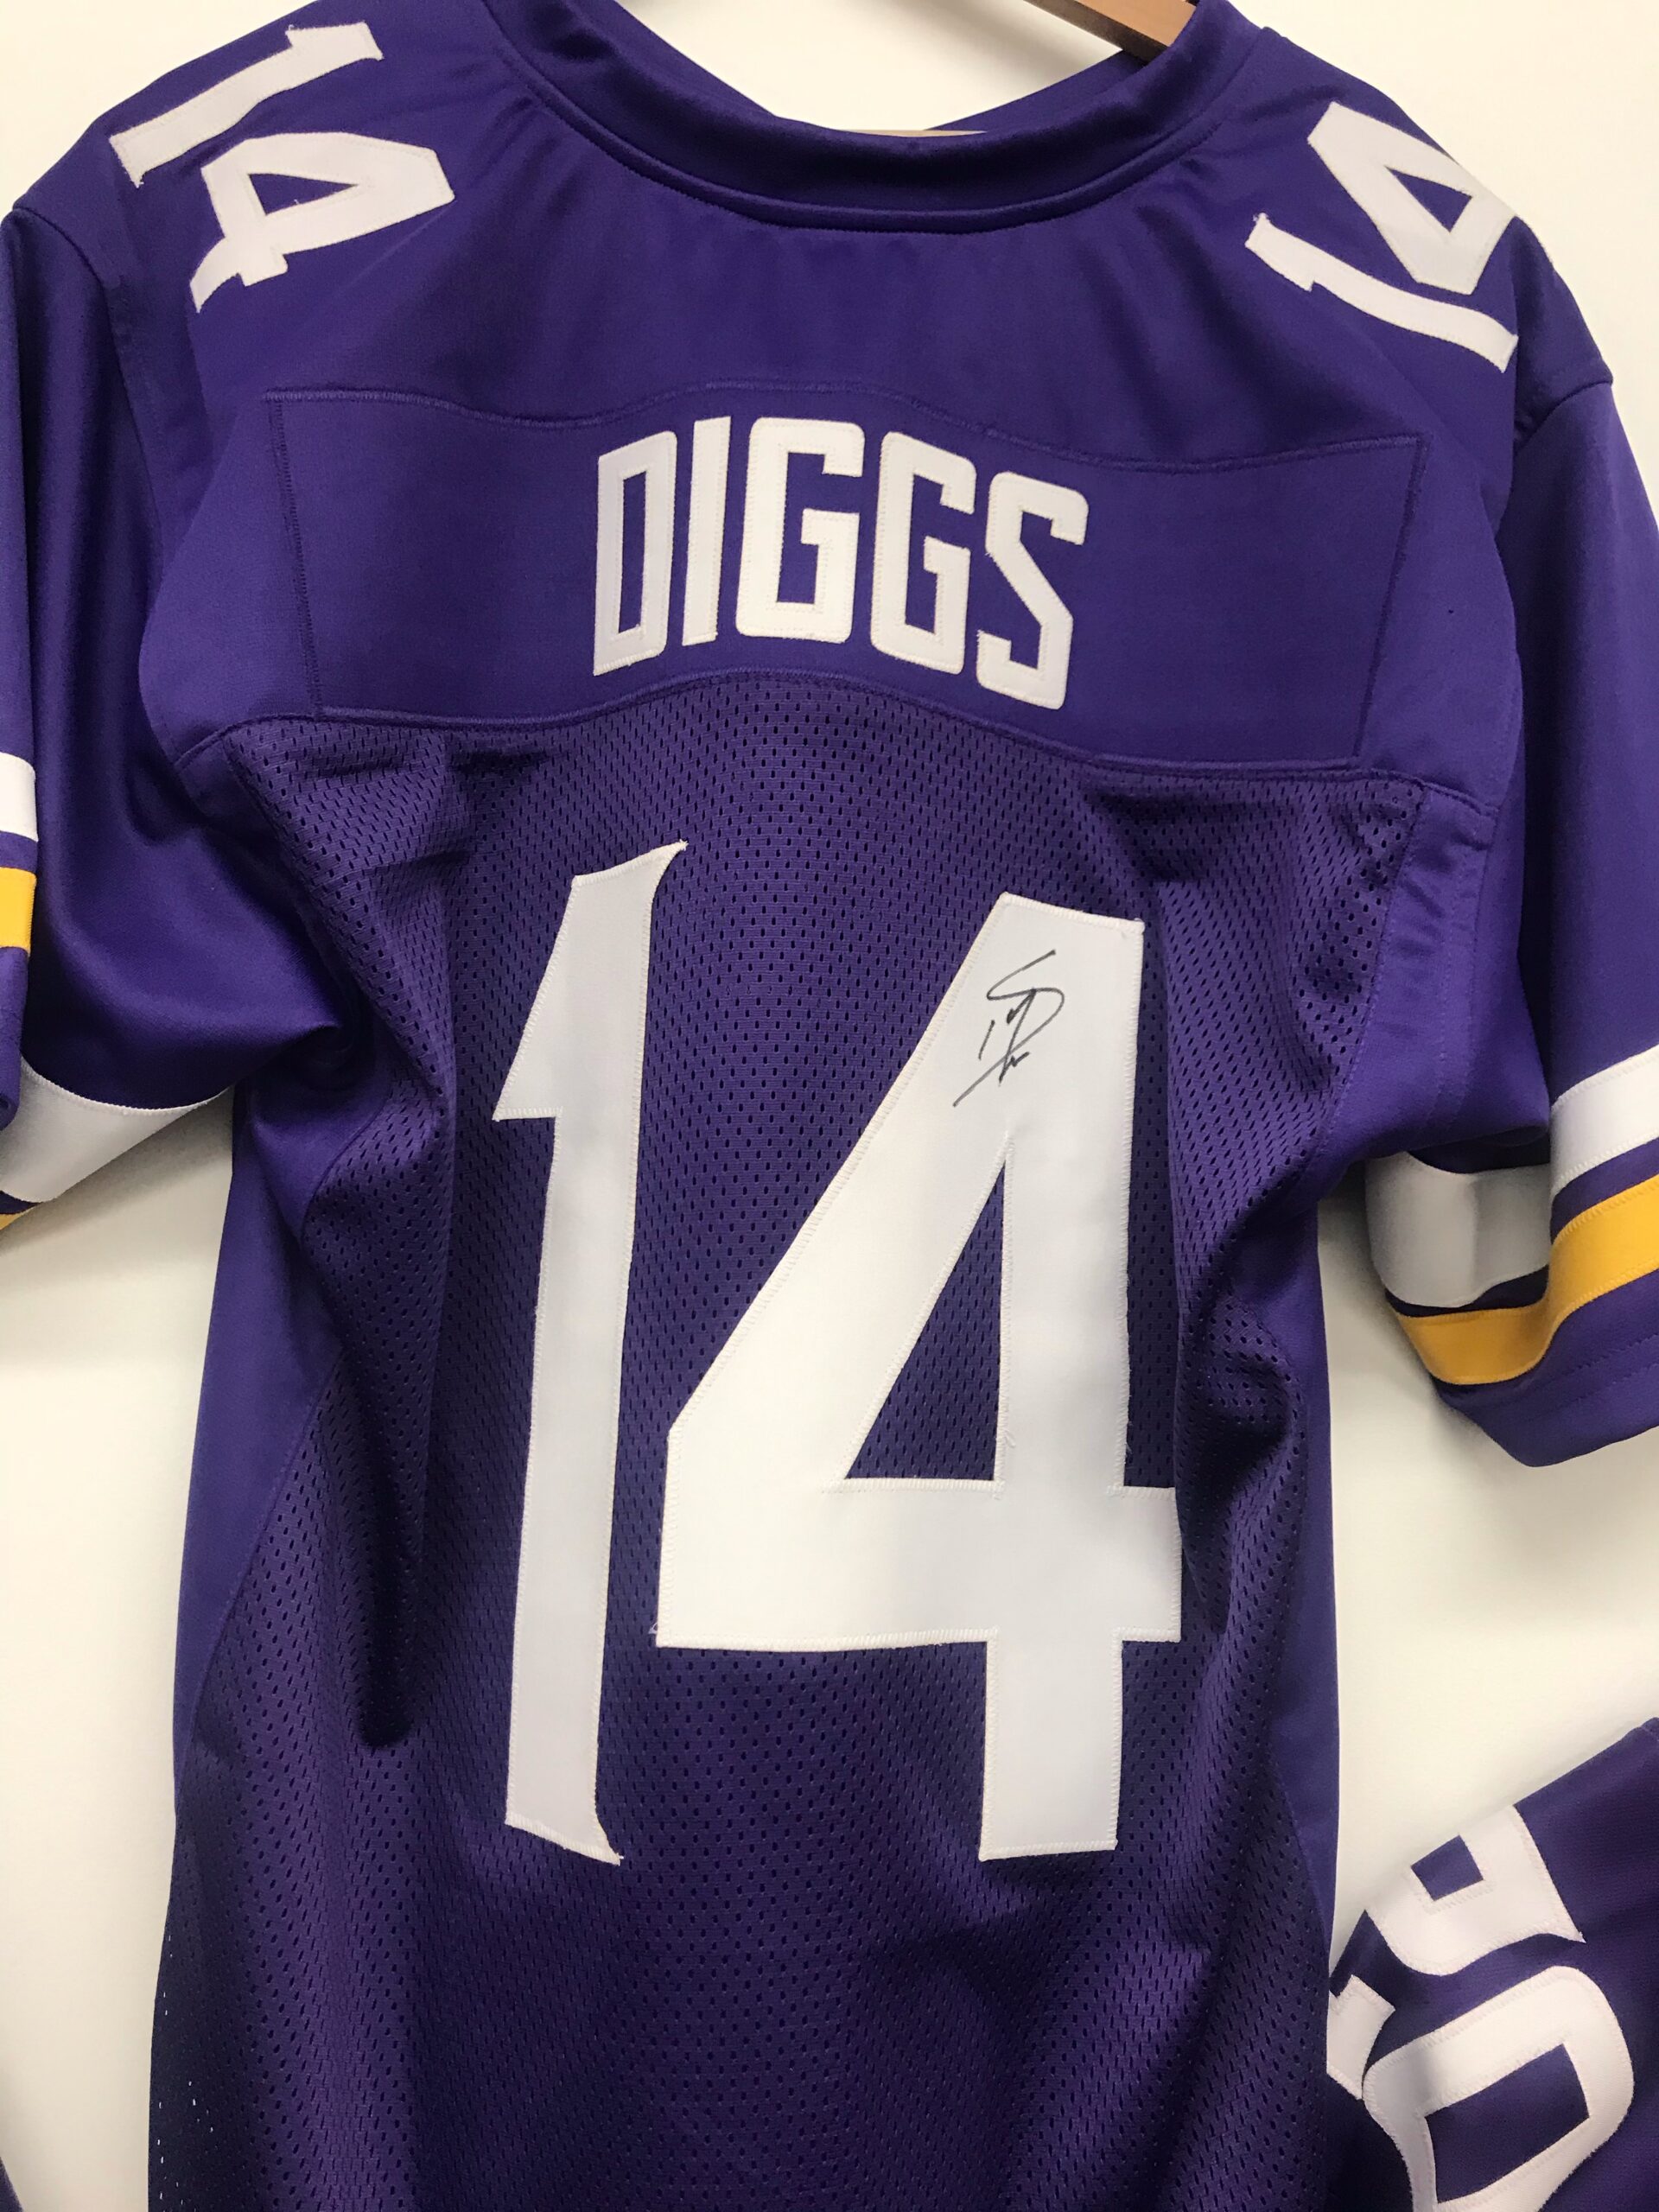 stefon diggs stitched jersey